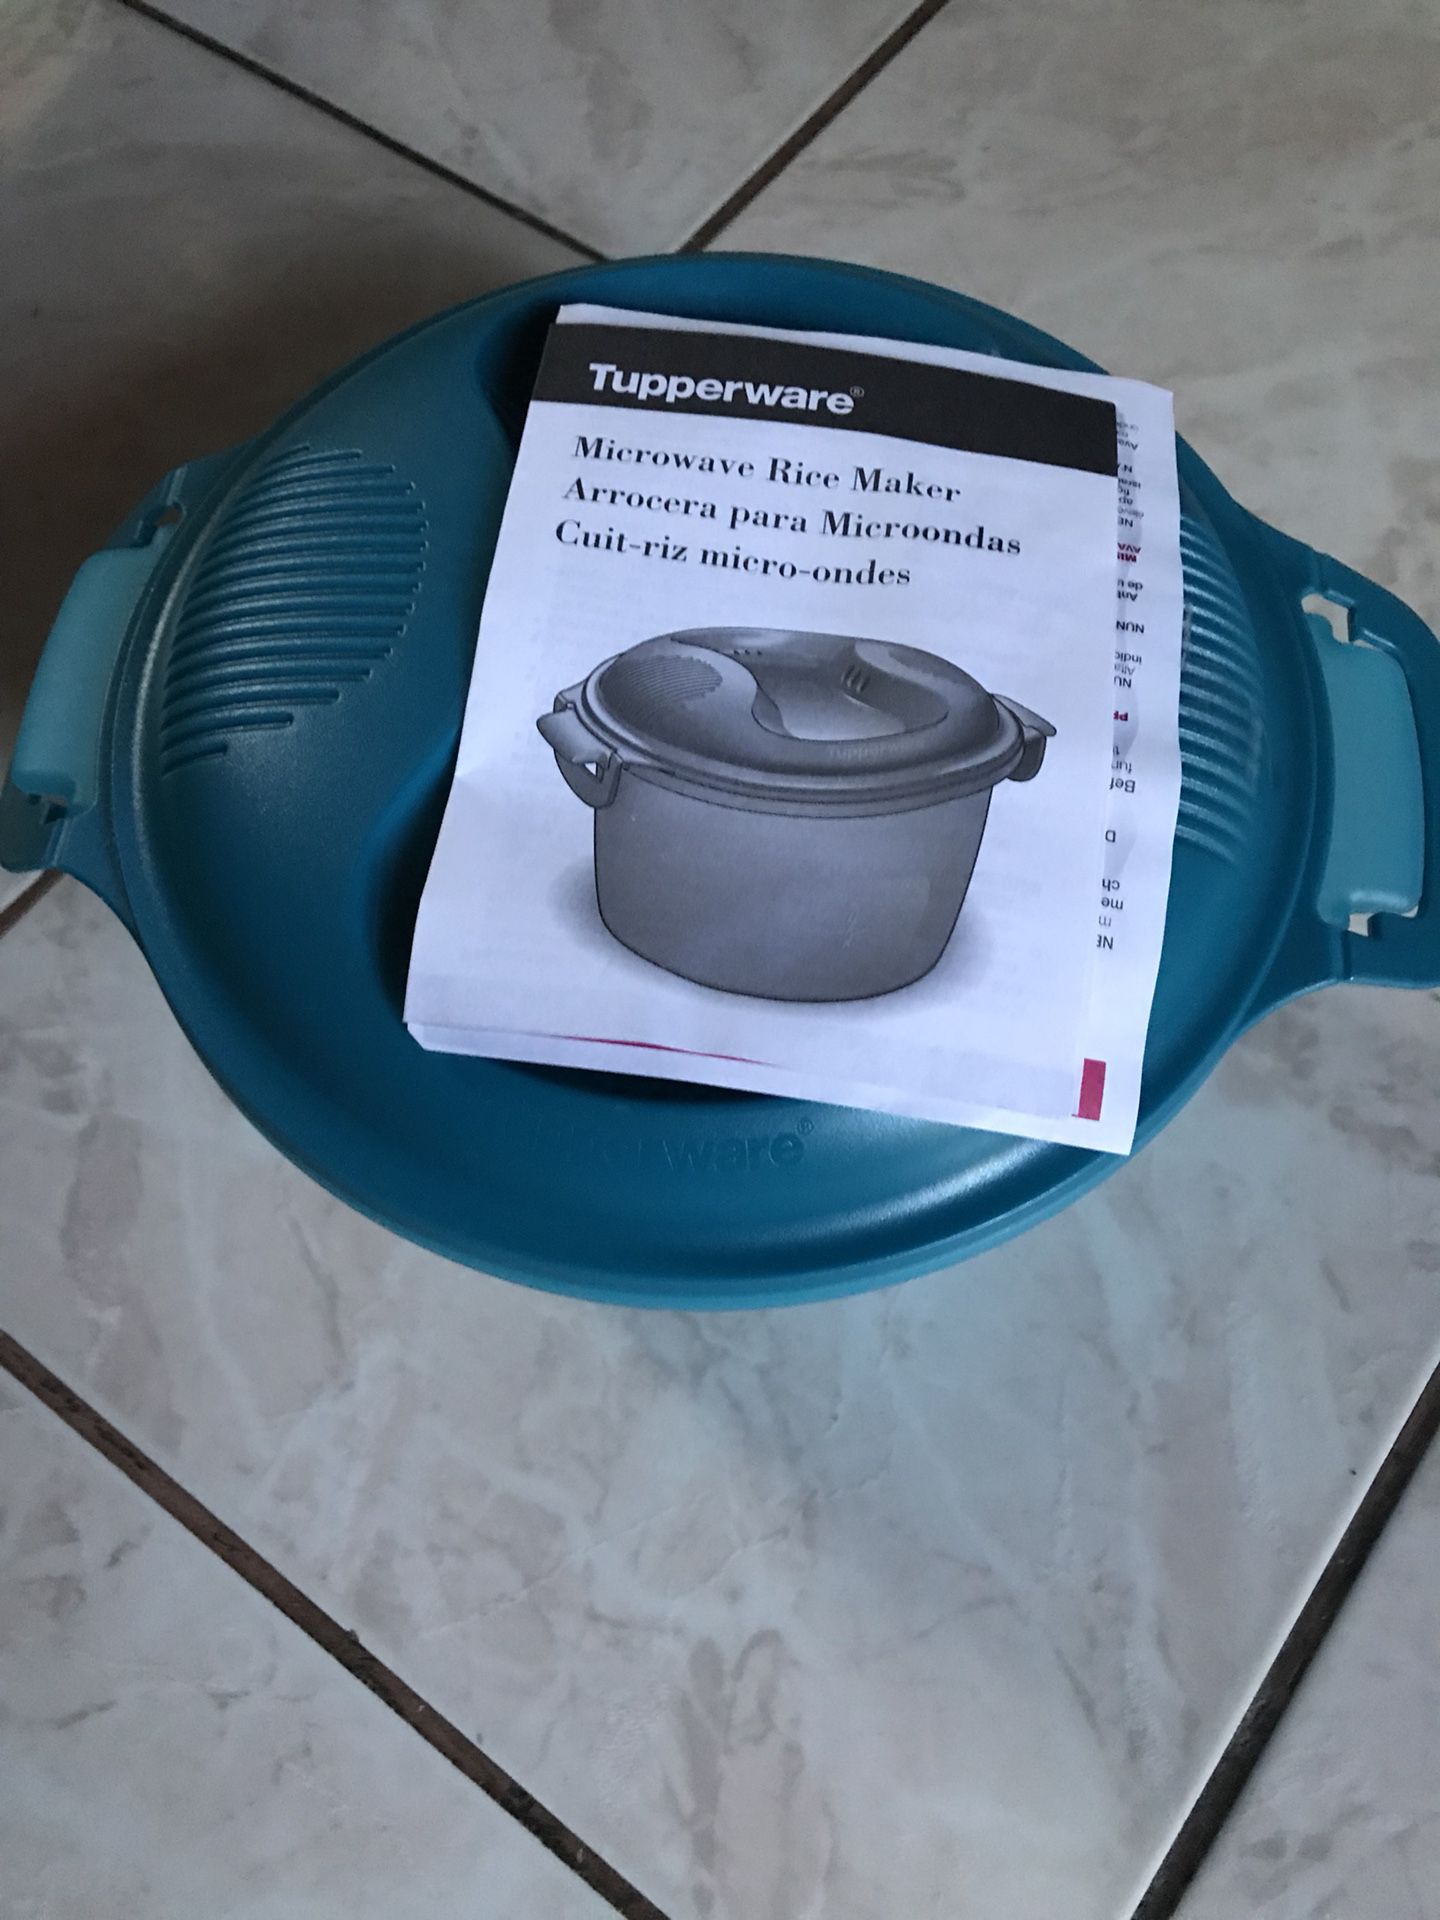 Deliberate Pack to put employment New Tupperware Rice Maker $15 for Sale in Stockton, CA - OfferUp